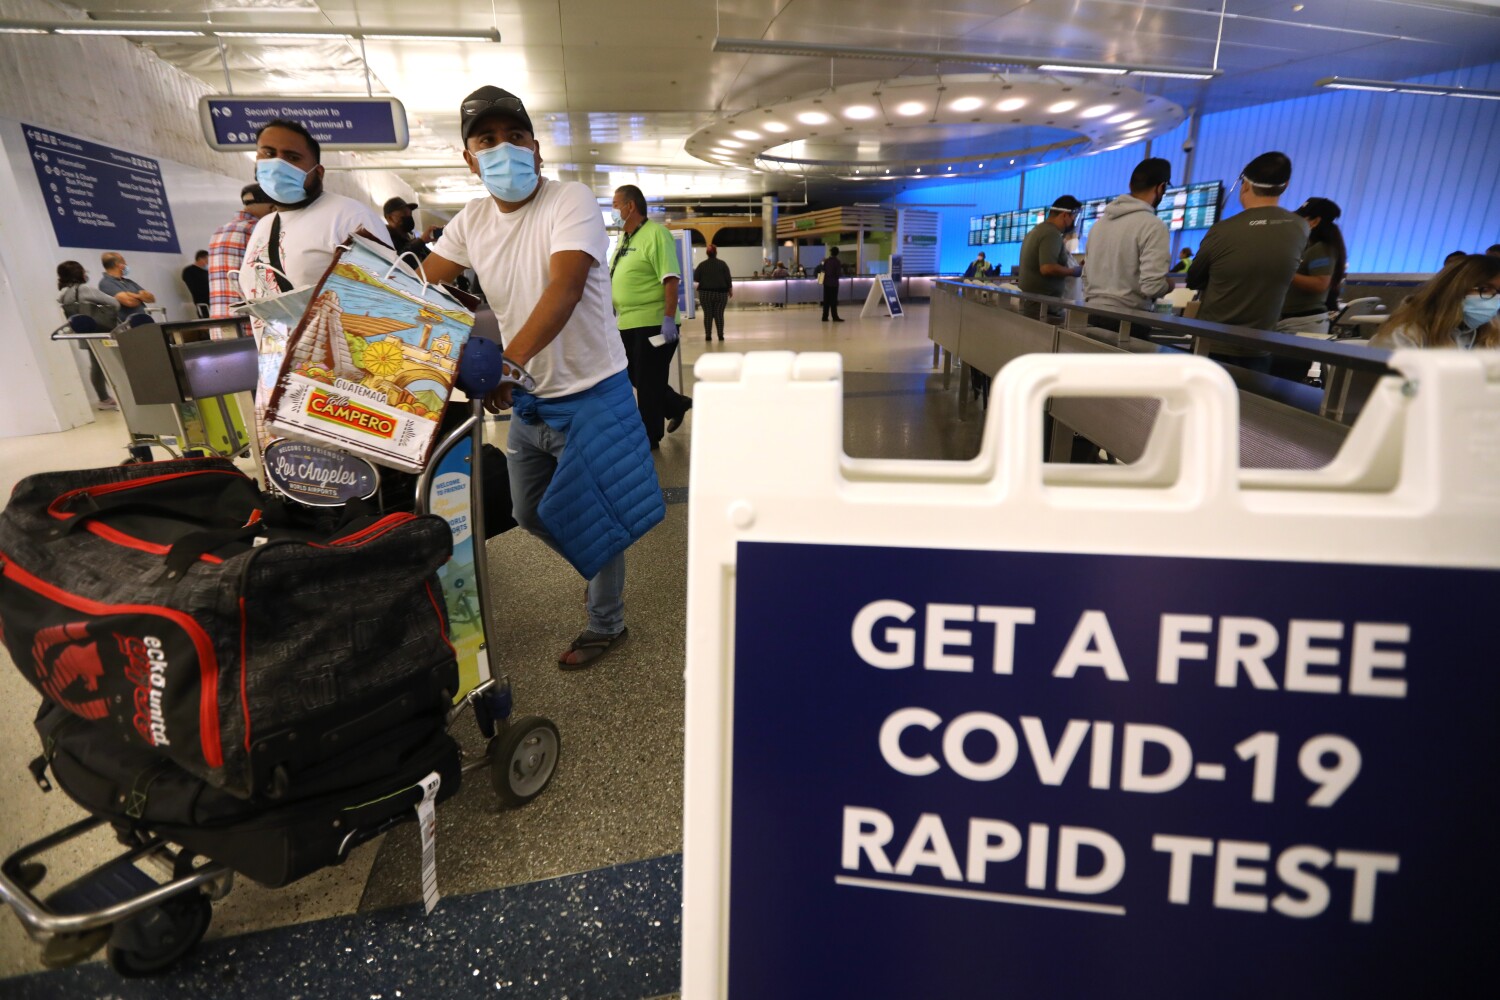 3.5 million travelers expected to pass through LAX this holiday season as Omicron arrives